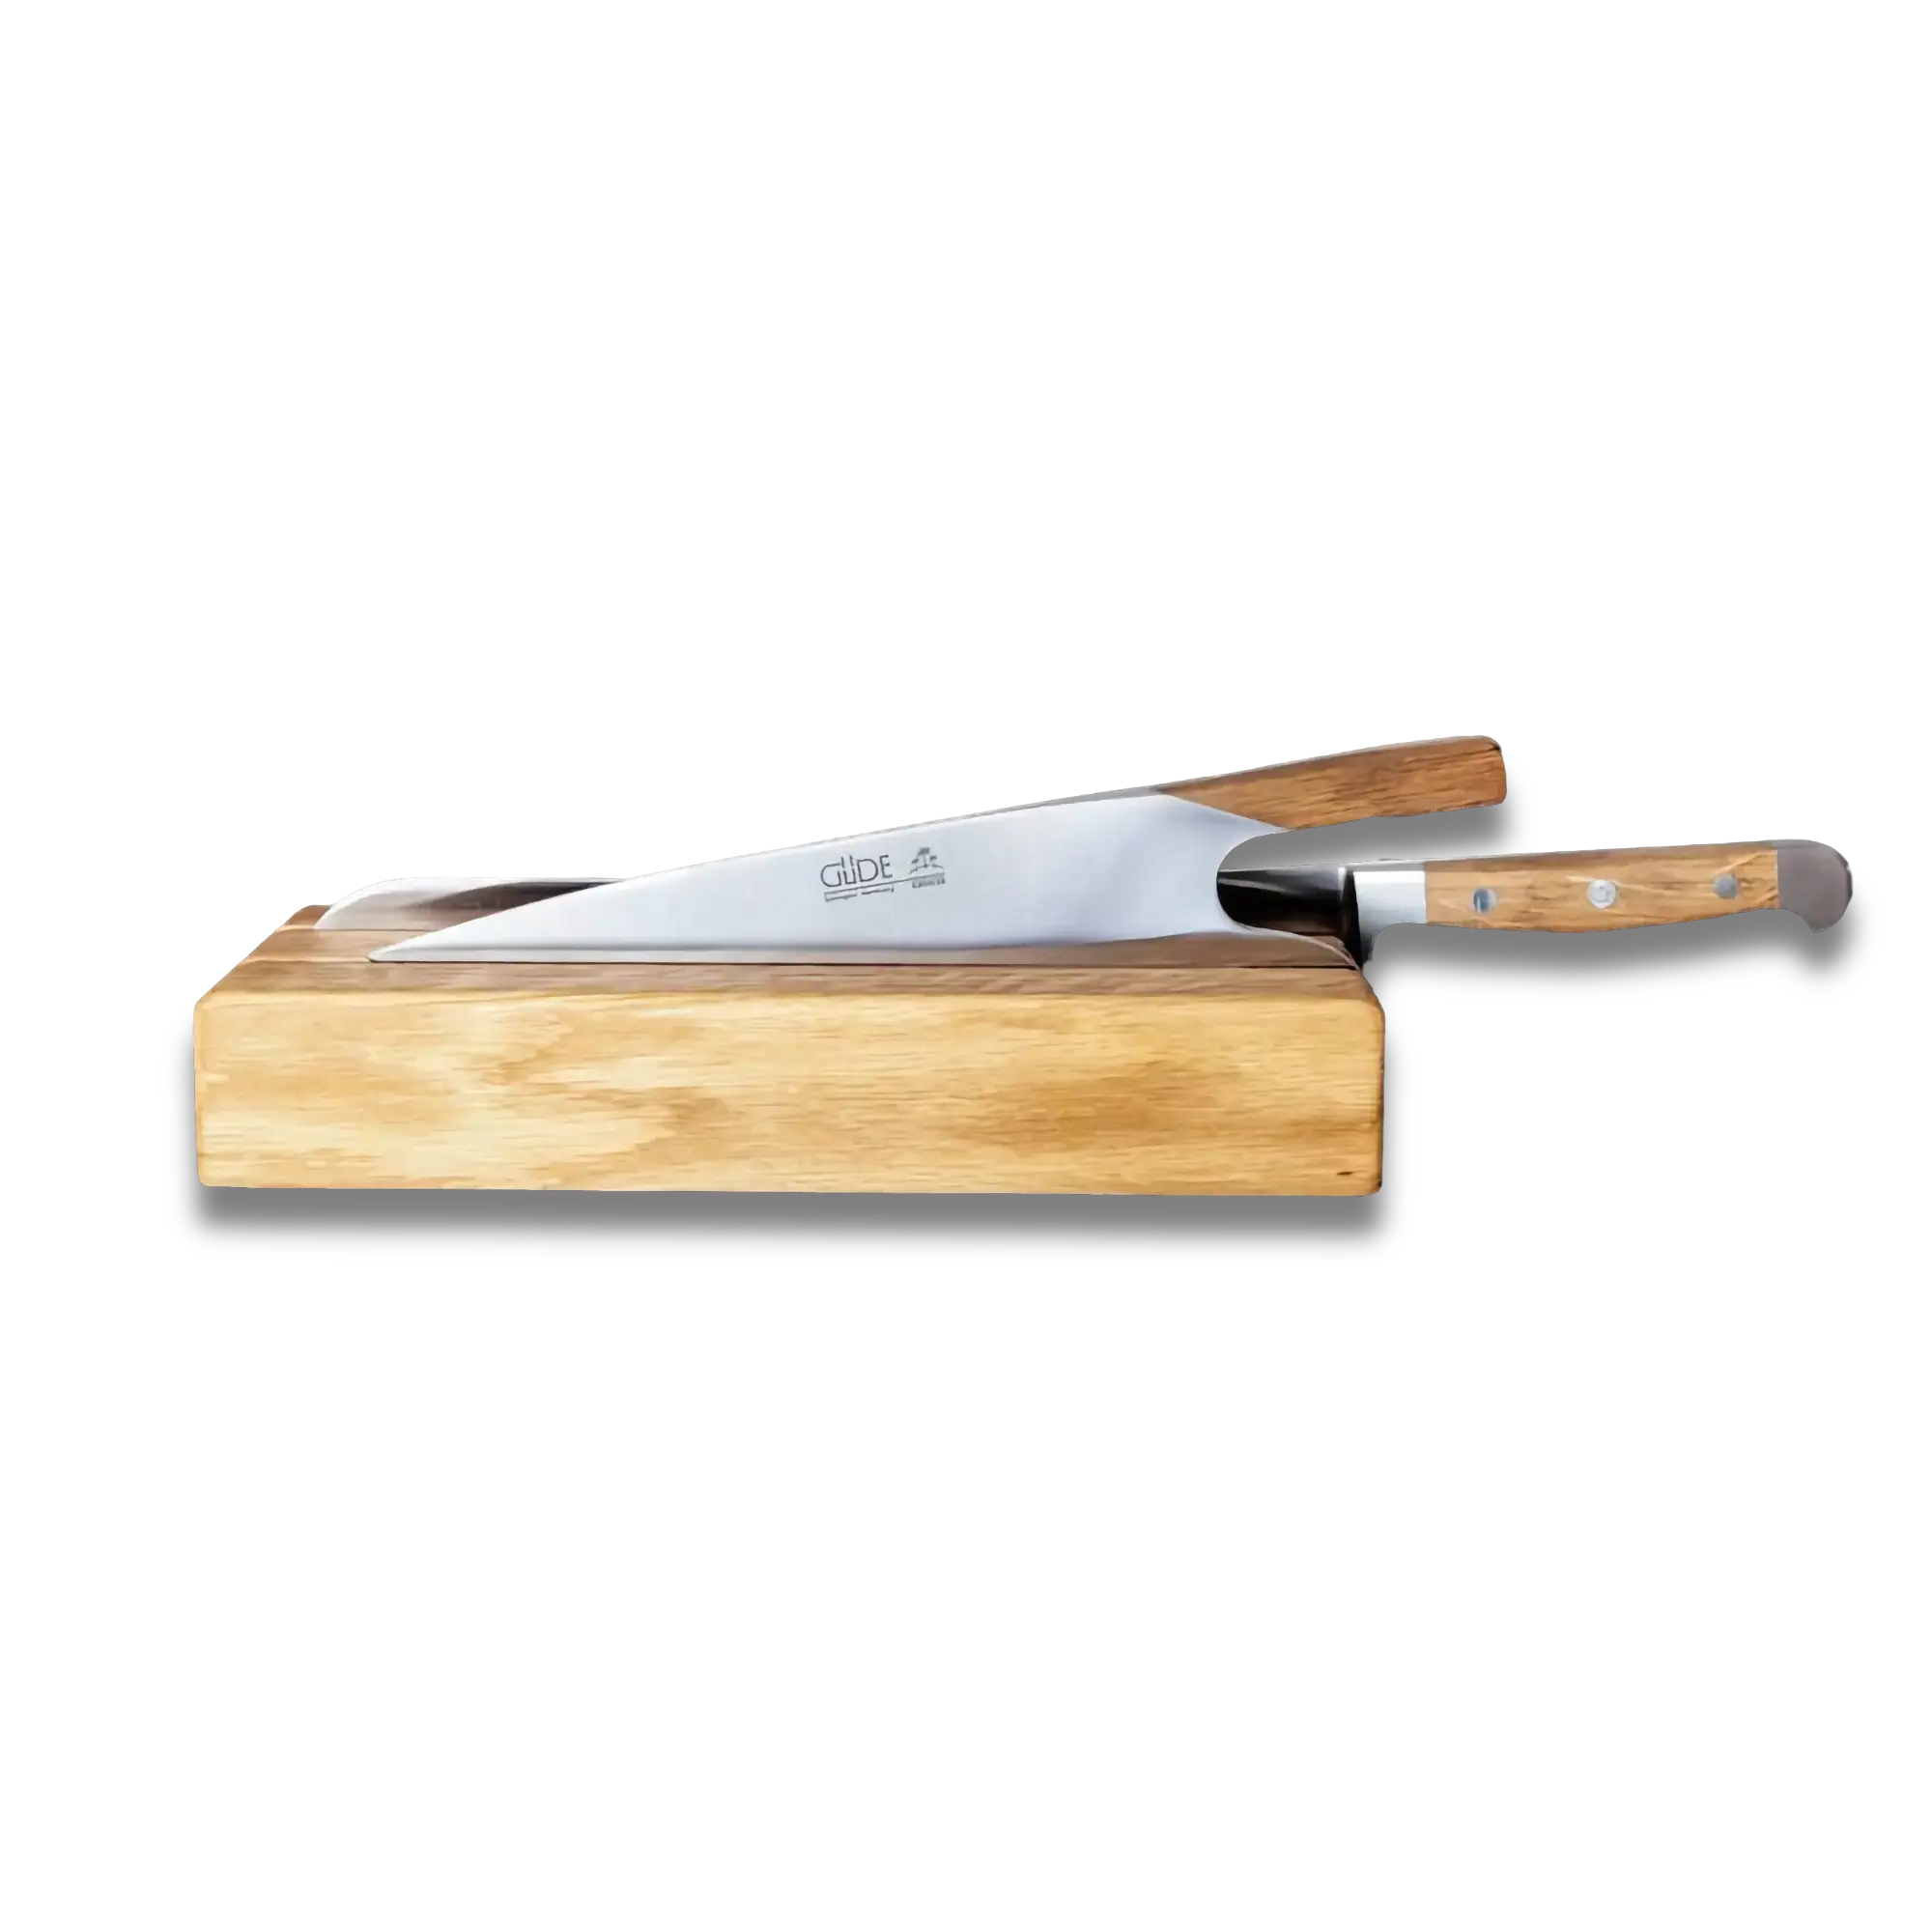 Knife Holder for Two - THE KNIFE + bread knife, price without knife